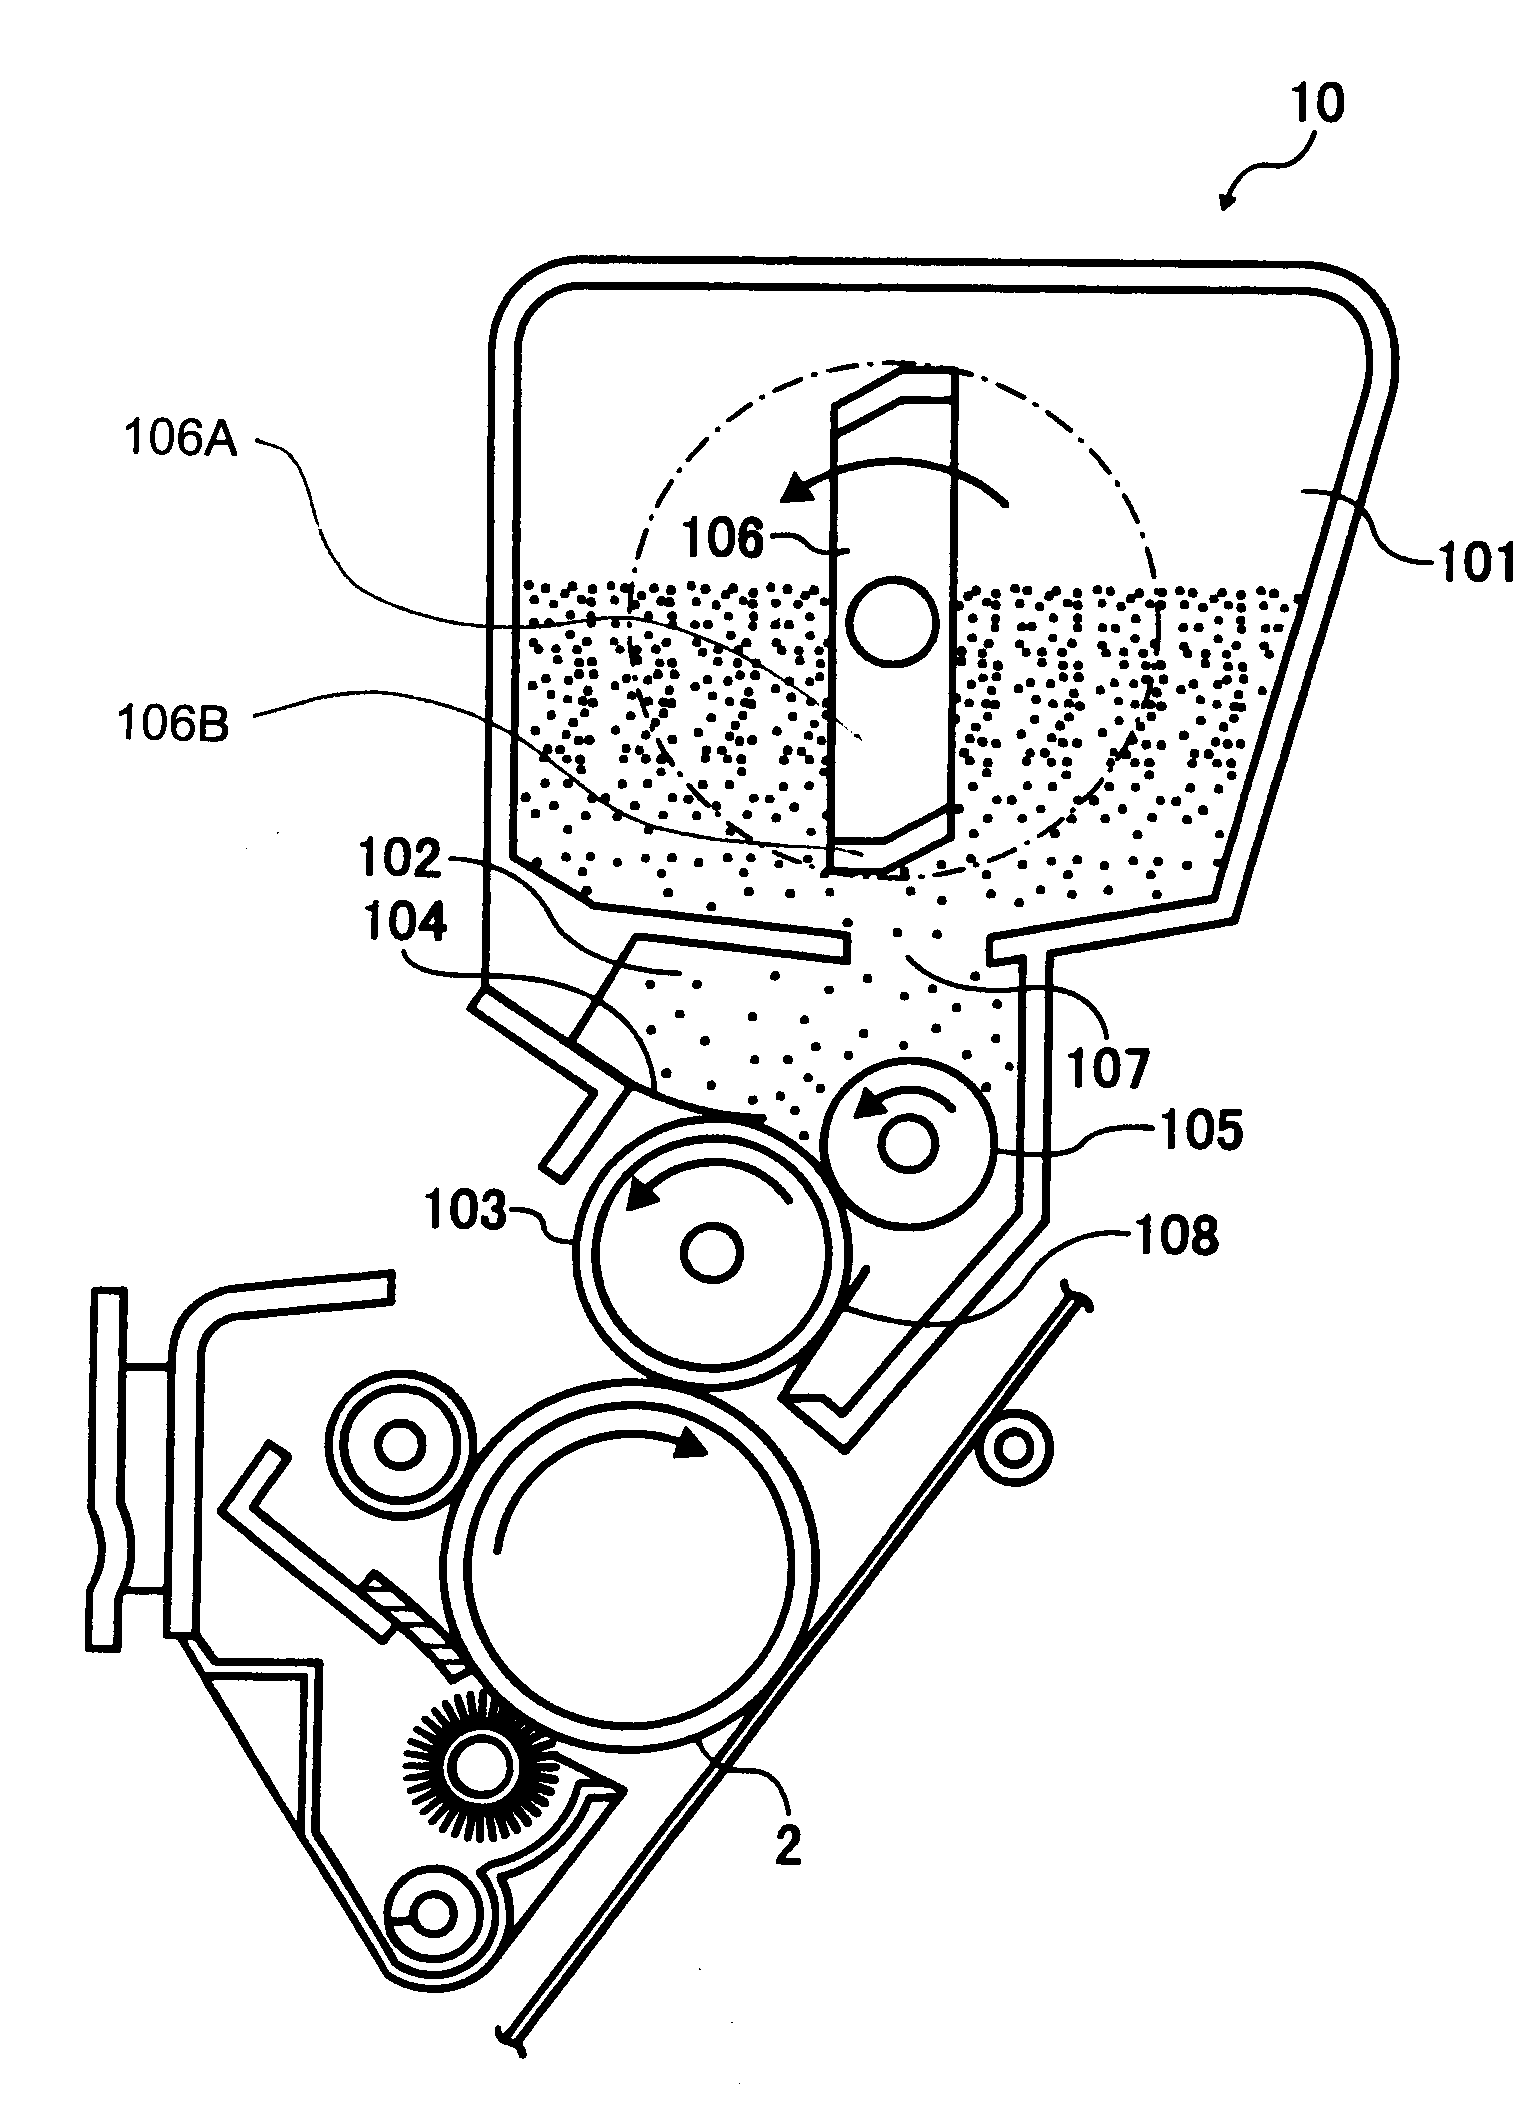 Full-color toner kit, process cartridge, and image forming method